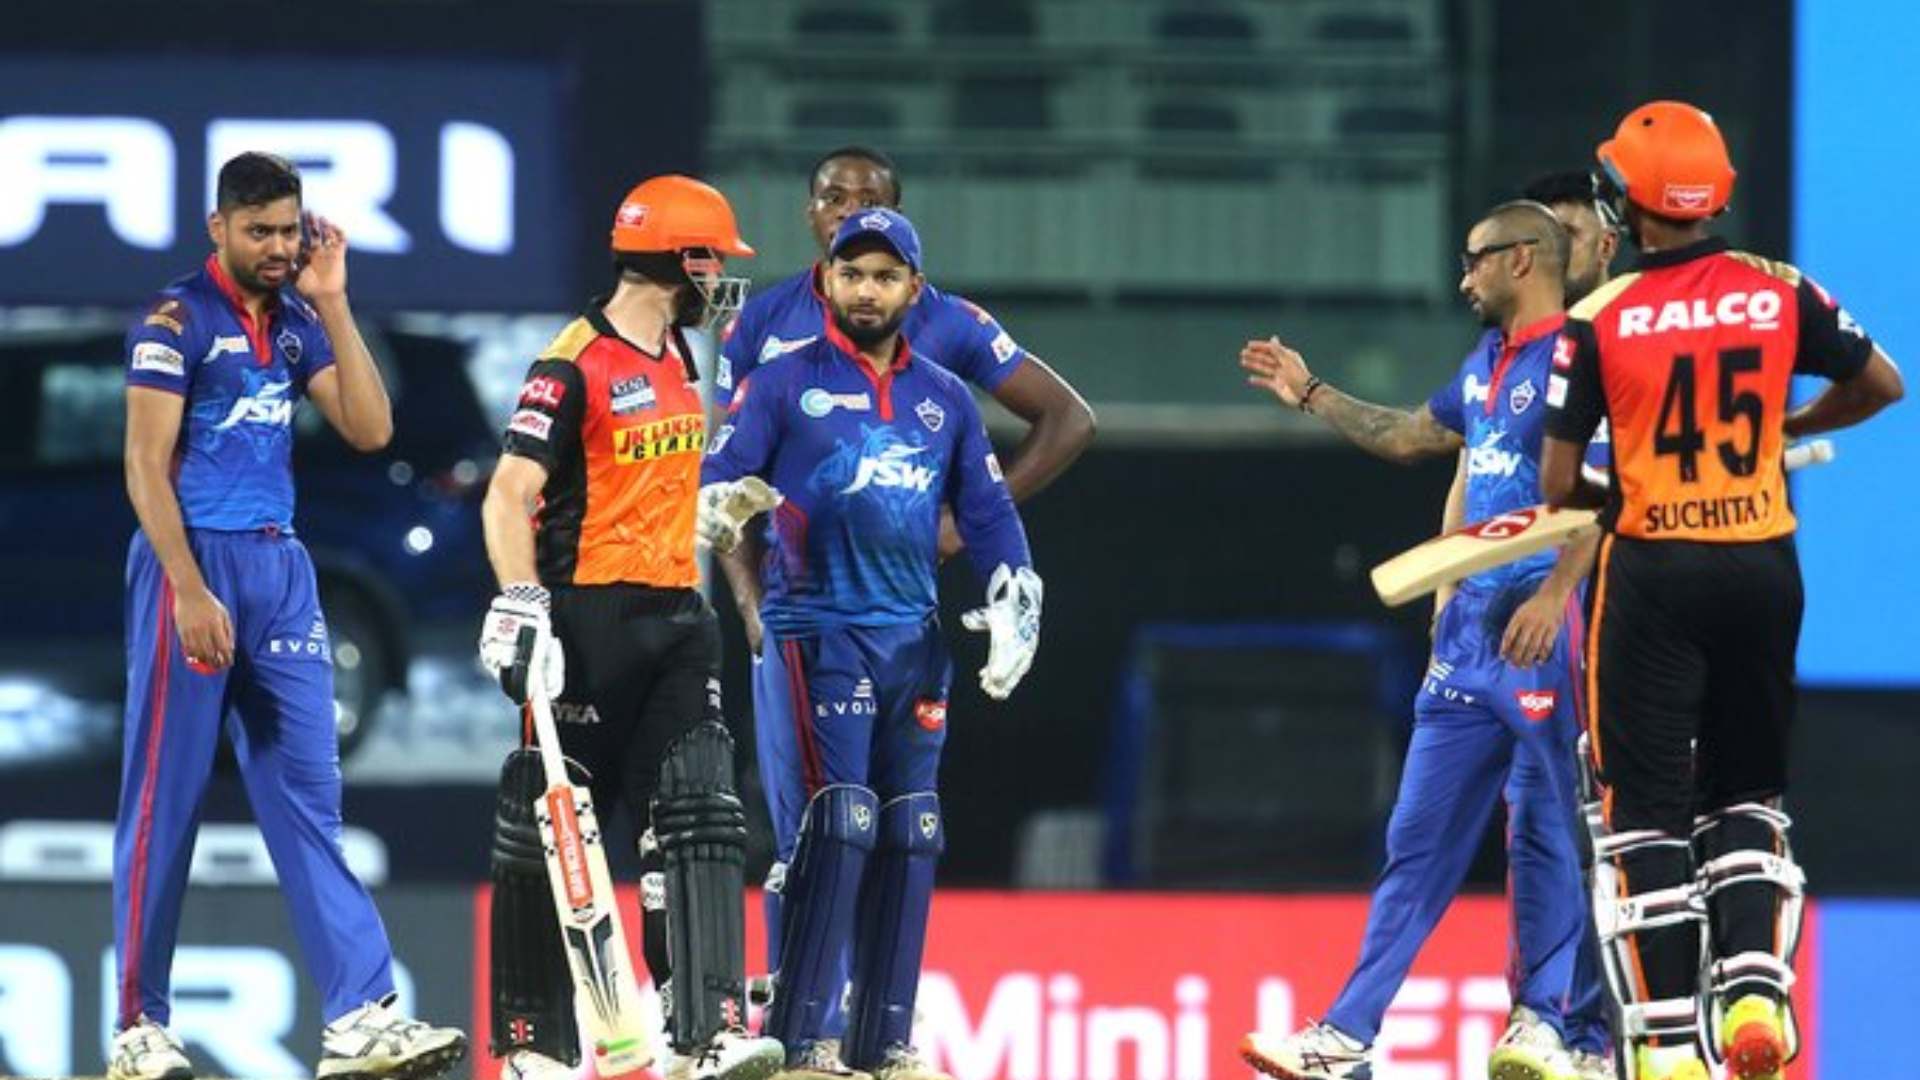 Delhi Capitals are in second spot after beating Sunrisers Hyderabad while Royal Challengers Bangalore suffered their first loss.